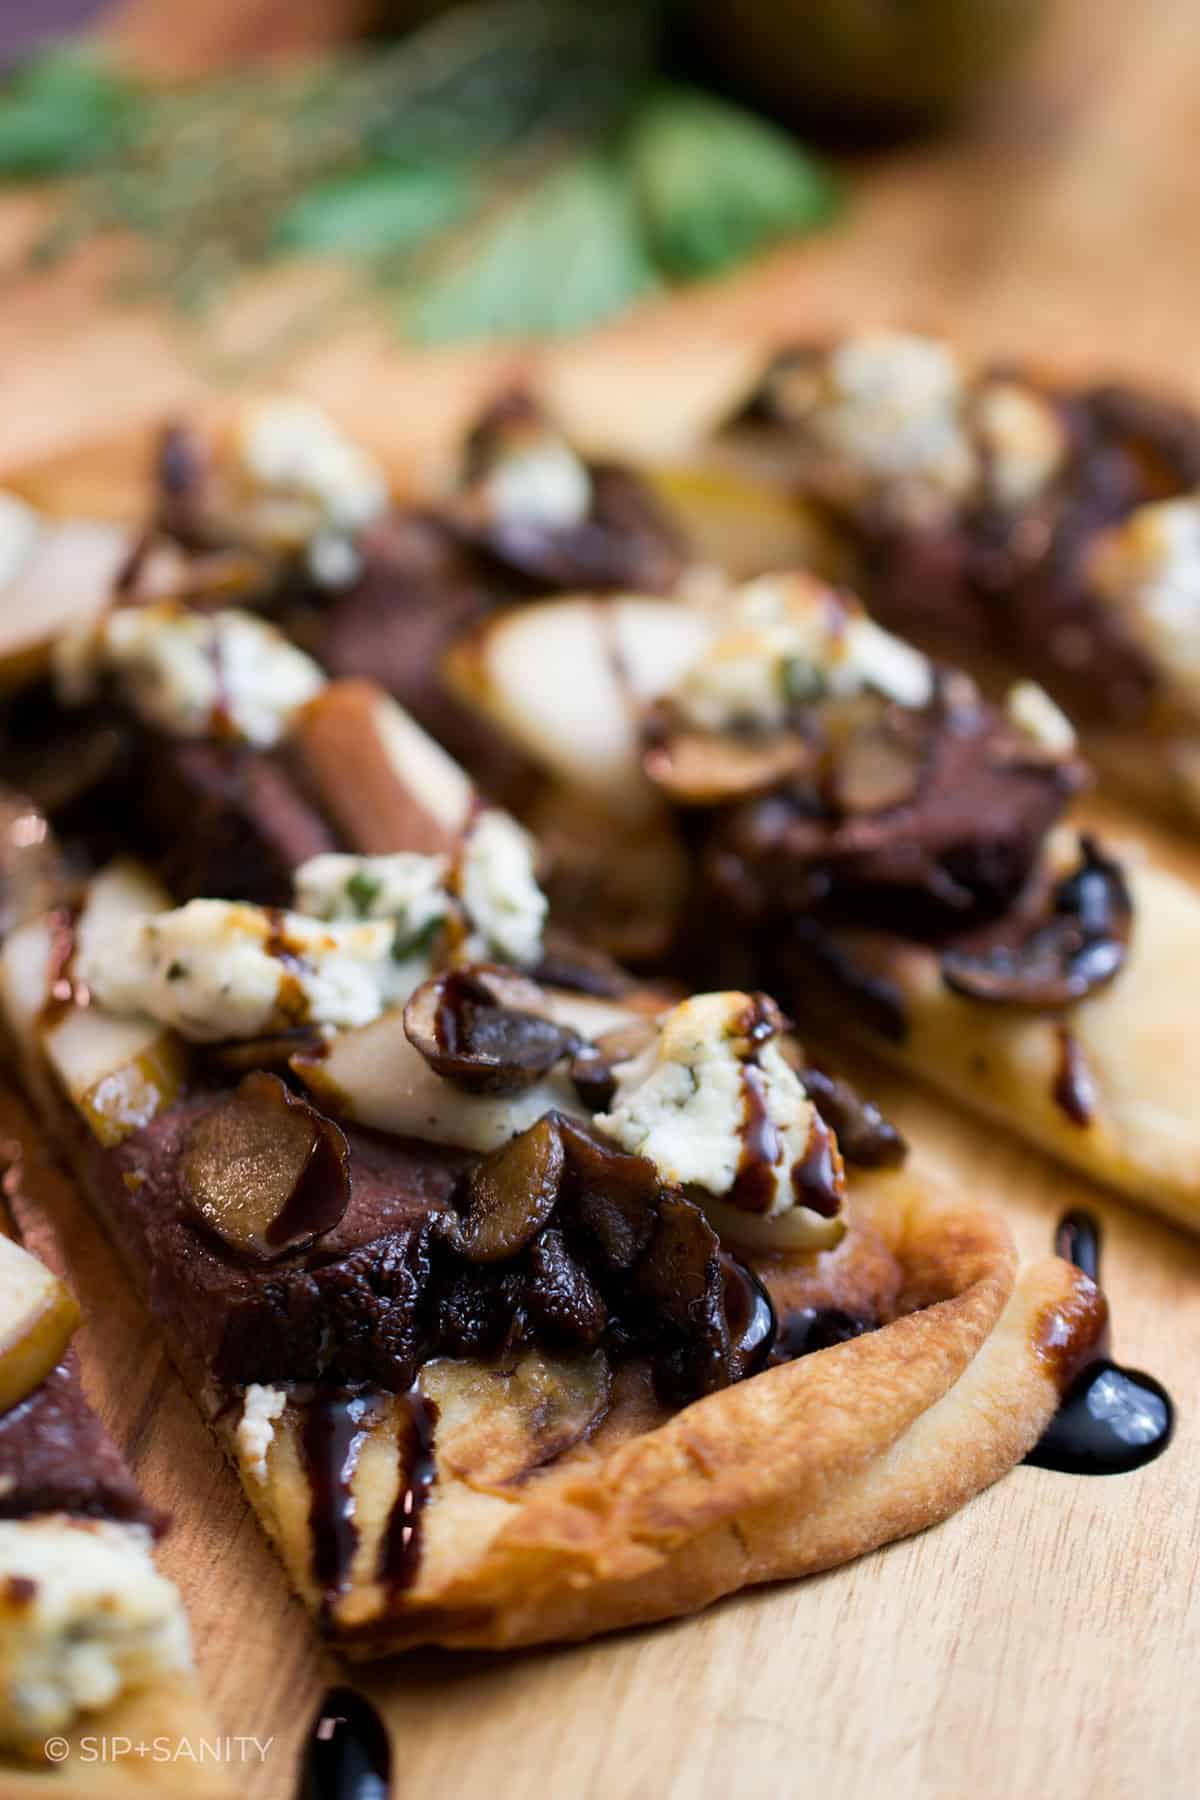 slices of duck and mushroom pizza drizzled with balsamic